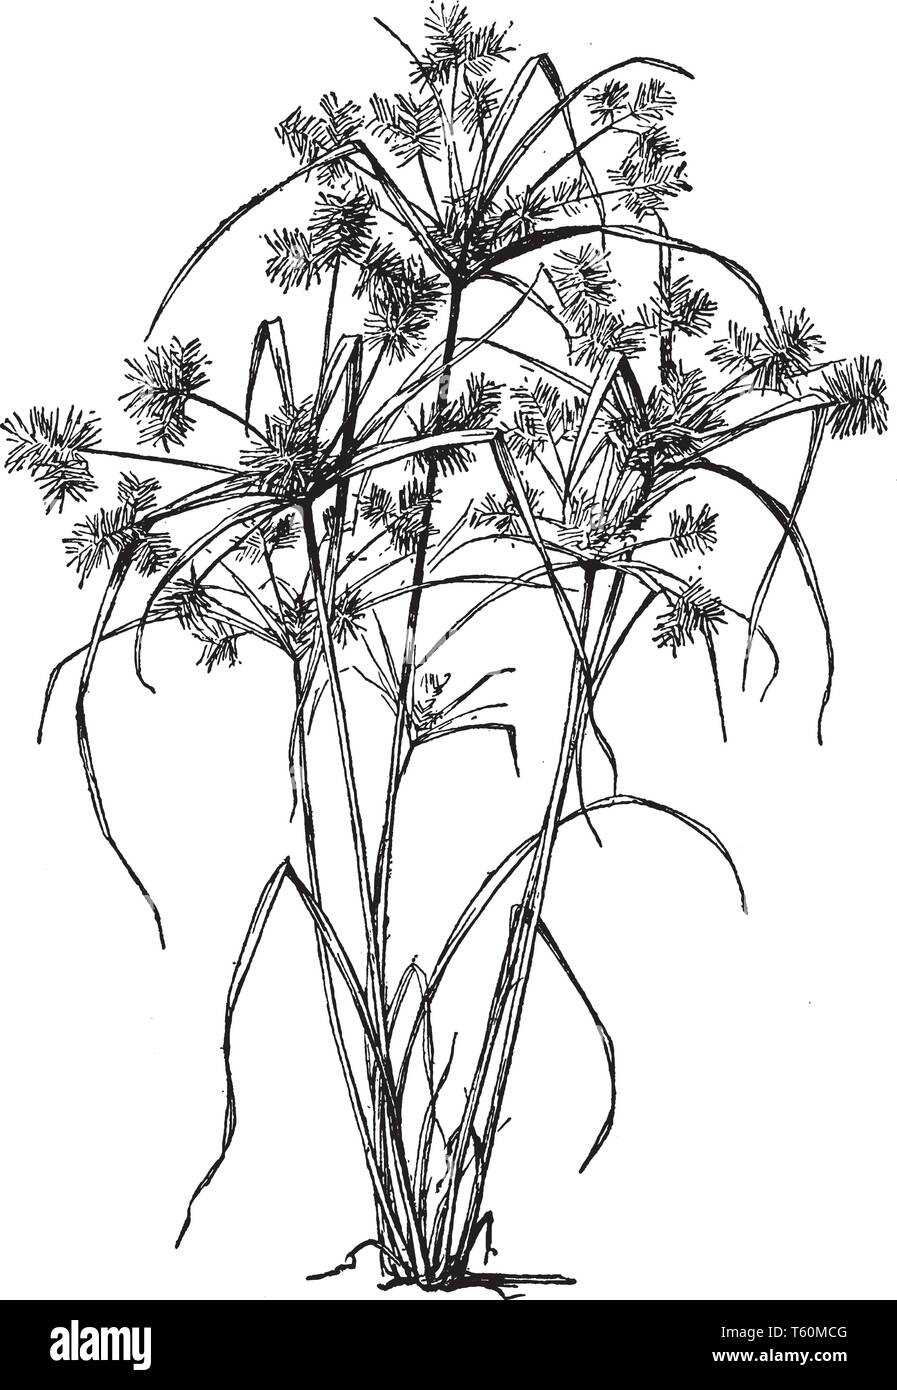 Cyperus esculentus is the common name of Chufa which is a tropical or subtropical plant. The tubers of the plant are edible, vintage line drawing or e Stock Vector